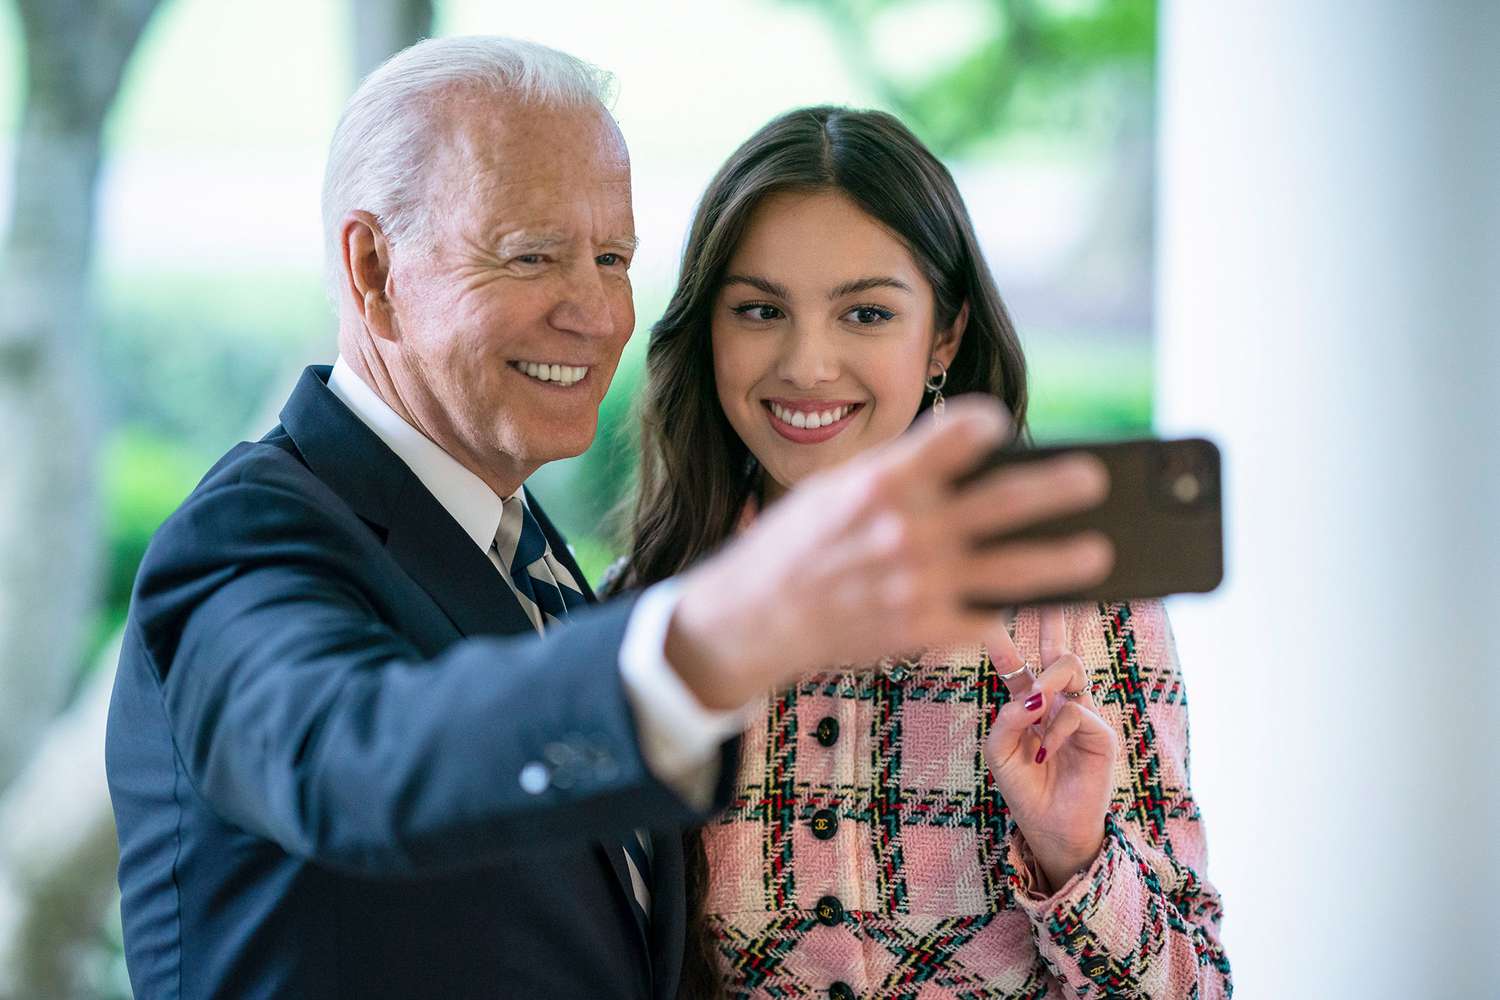 President Joe Biden records a video address with Olivia Rodrigo on Wednesday, July 14, 2021, in the Oval Office of the White House.